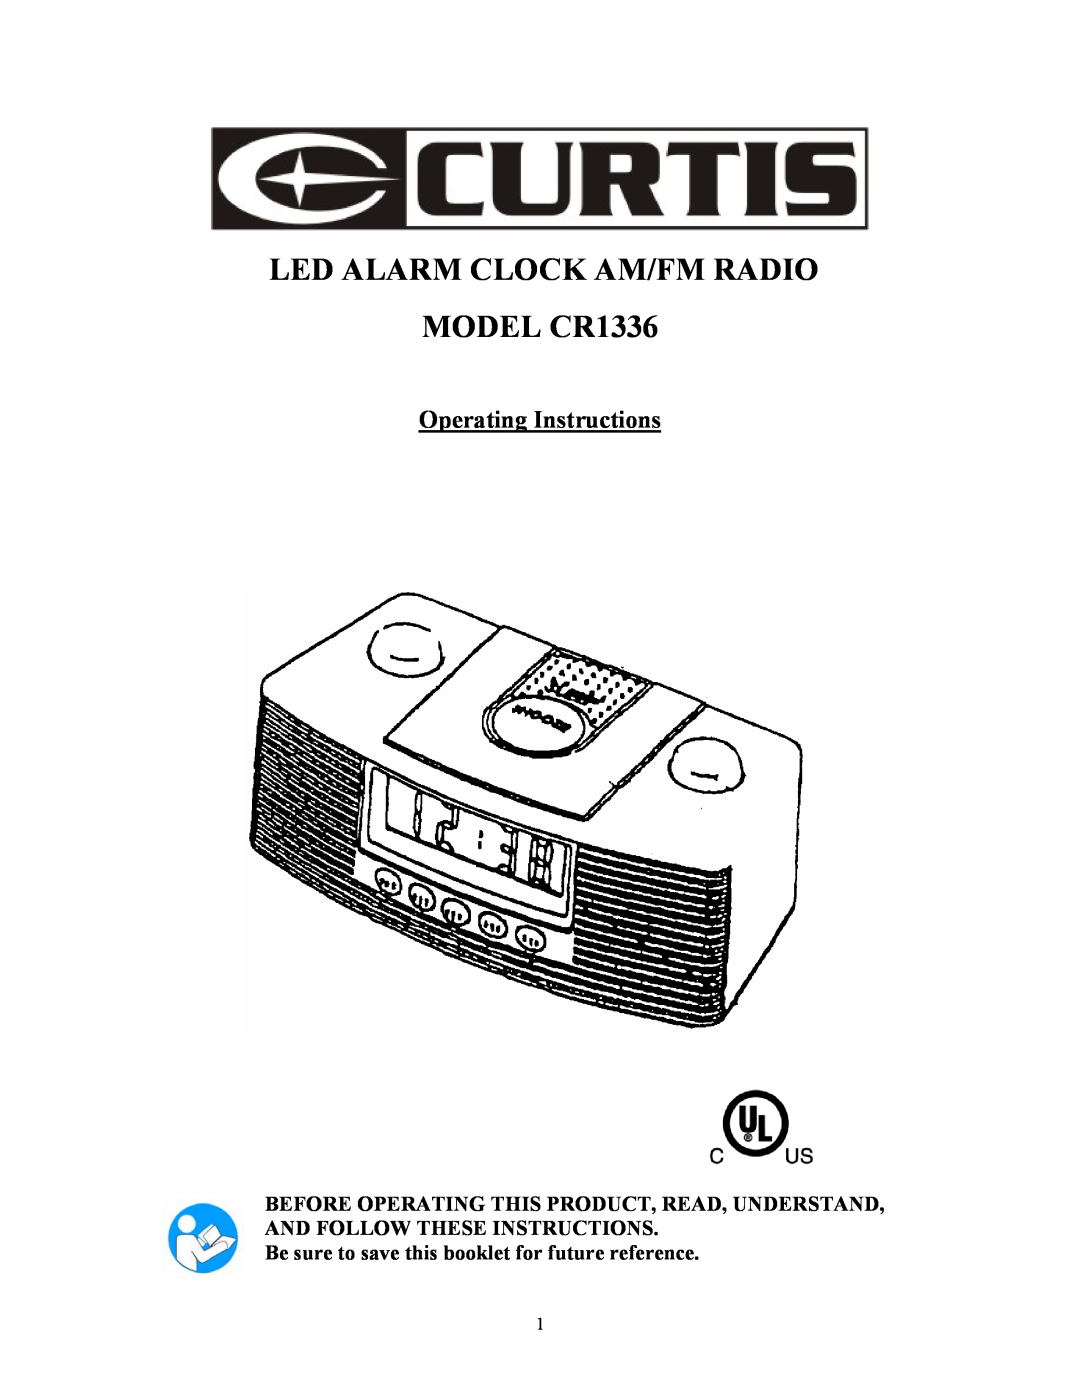 Curtis manual Be sure to save this booklet for future reference, LED ALARM CLOCK AM/FM RADIO MODEL CR1336 